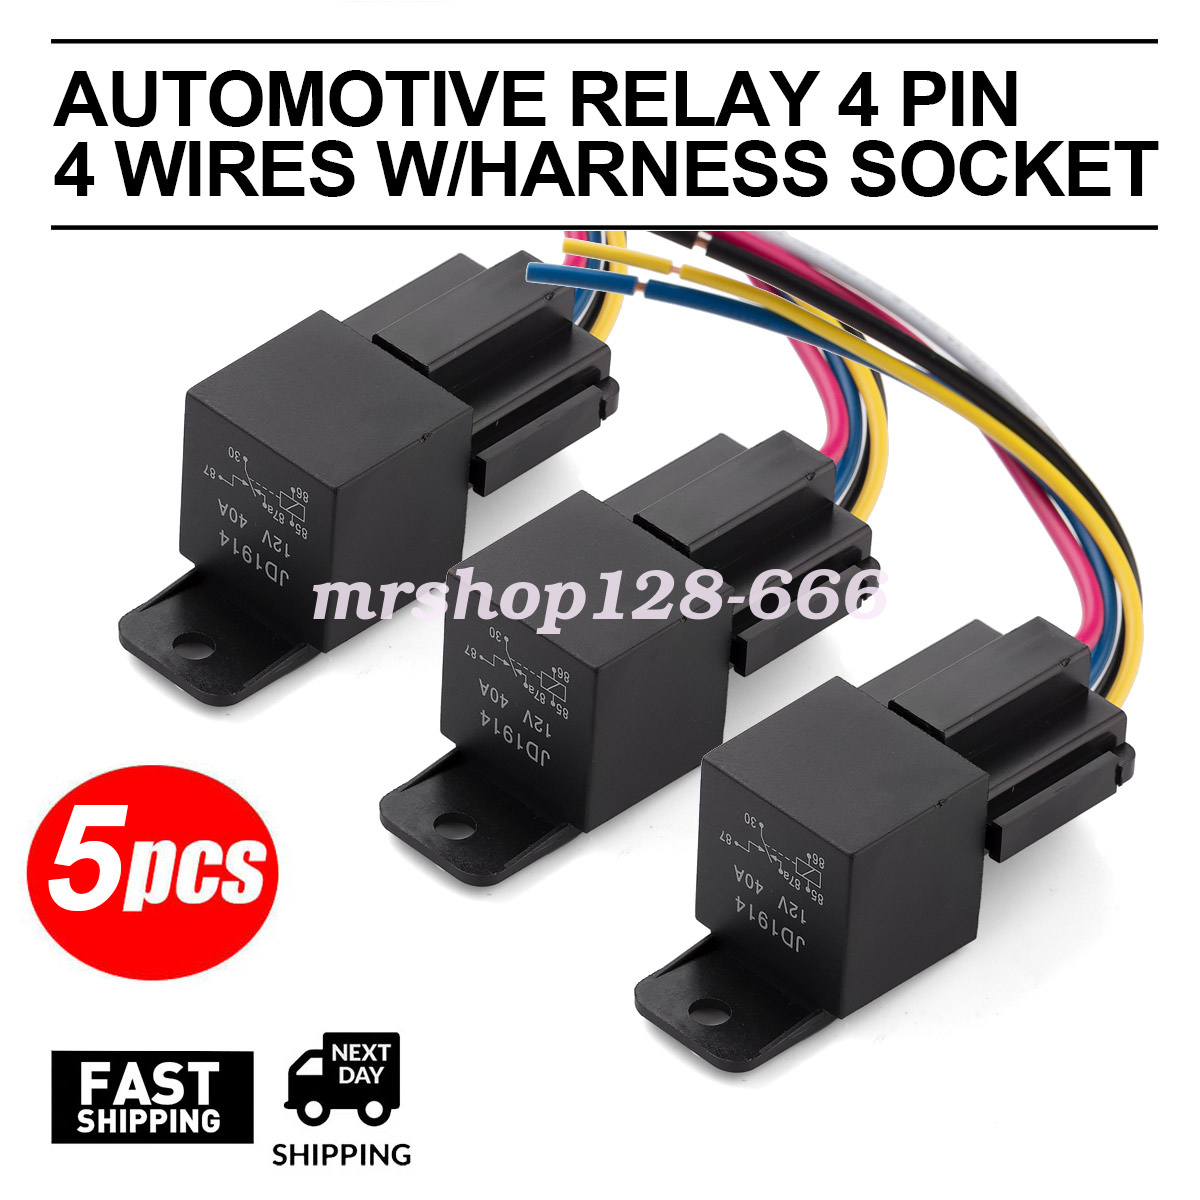 5Pcs DC 12V Car SPDT Automotive Relay 5 Pin 5 Wires w//Harness Socket 30//40 Amp